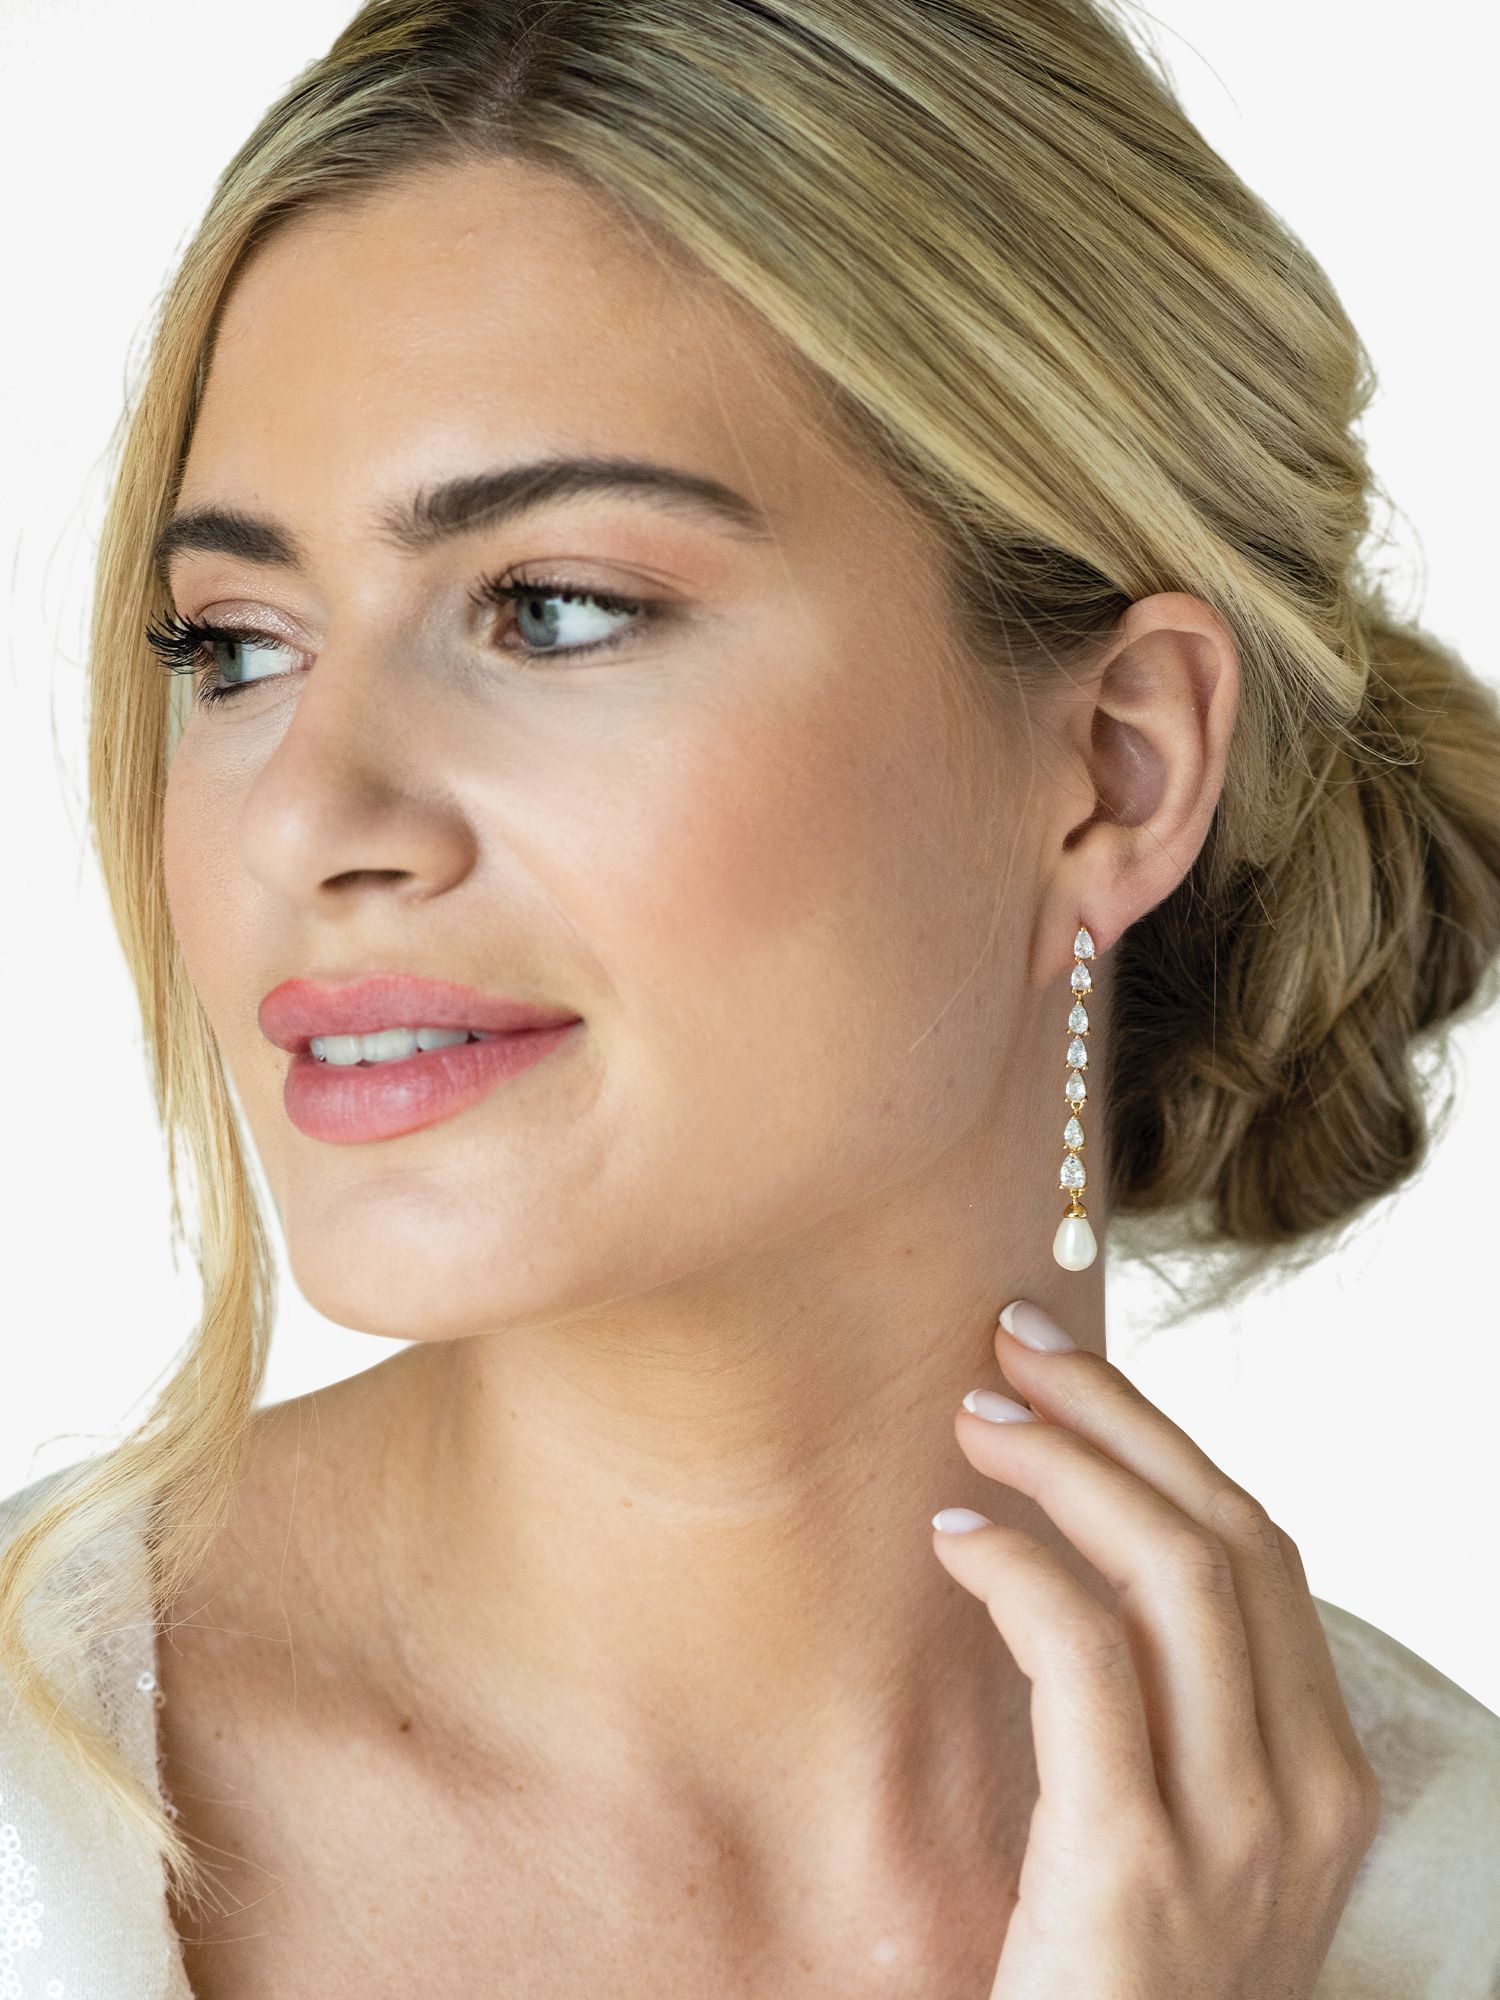 Buy Ivory & Co. Melbourne Crystal & Faux Pearl Drop Earrings Online at johnlewis.com